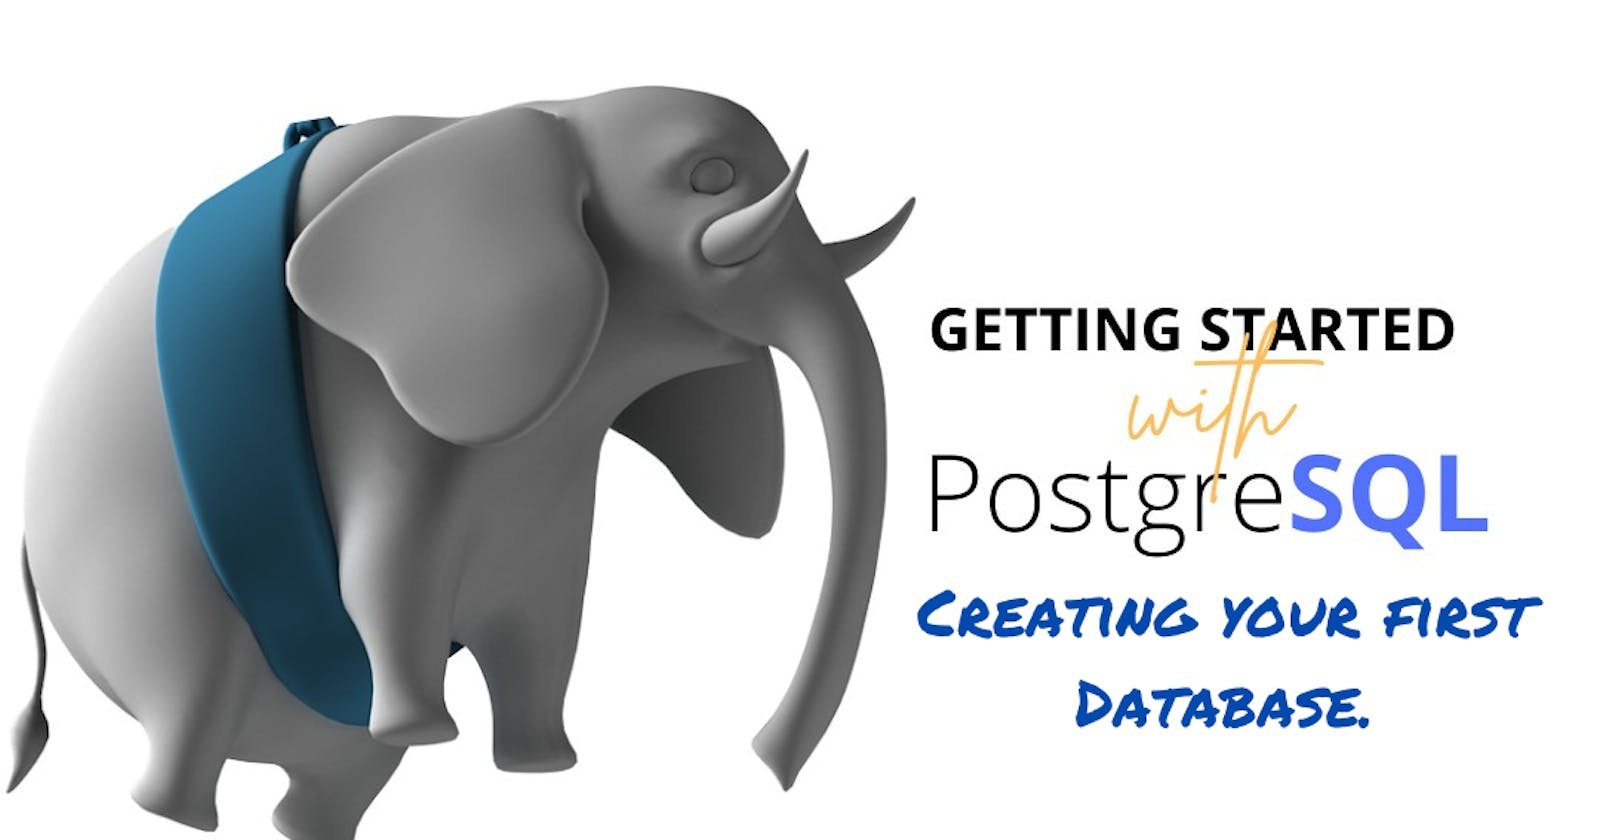 Creating your First Database with PostgreSQL.